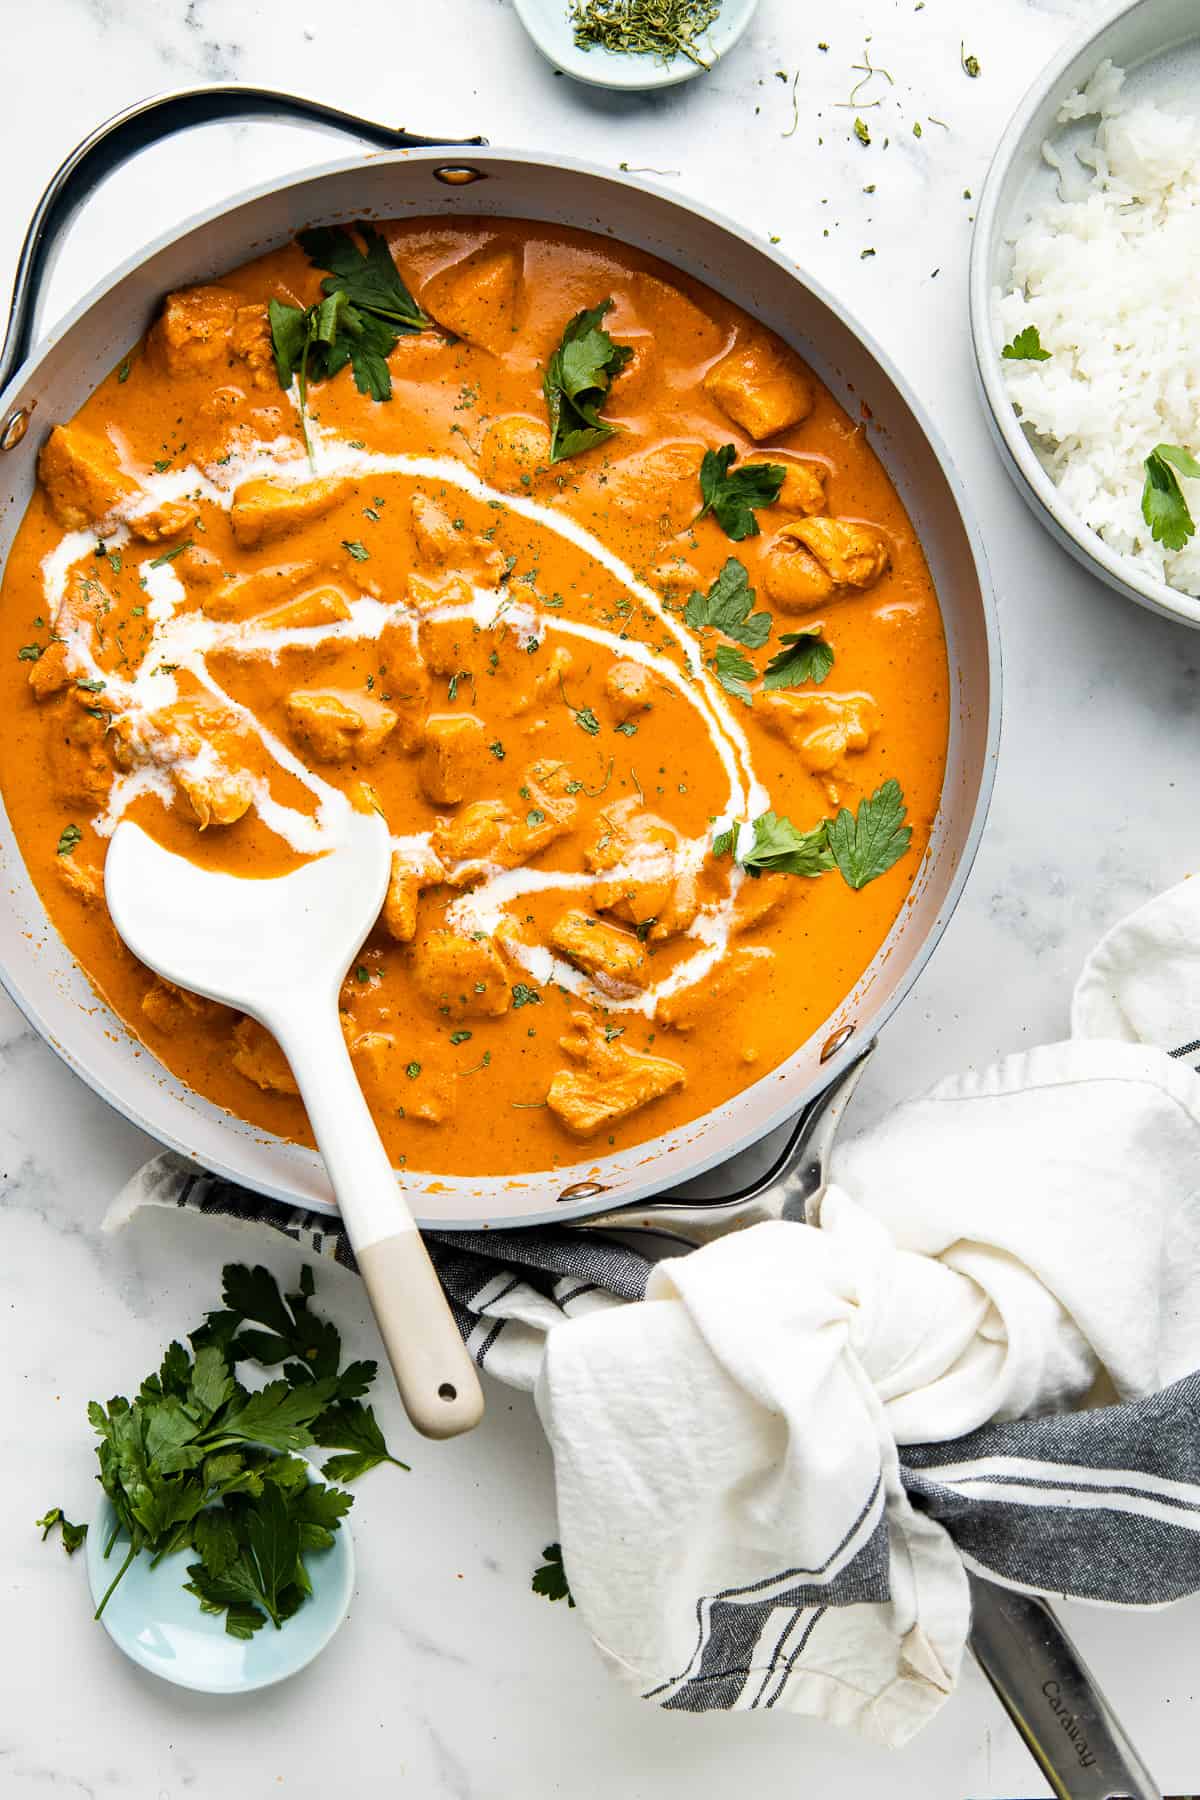 Butter chicken served in a skillet, garnished with cilantro and served with rice.